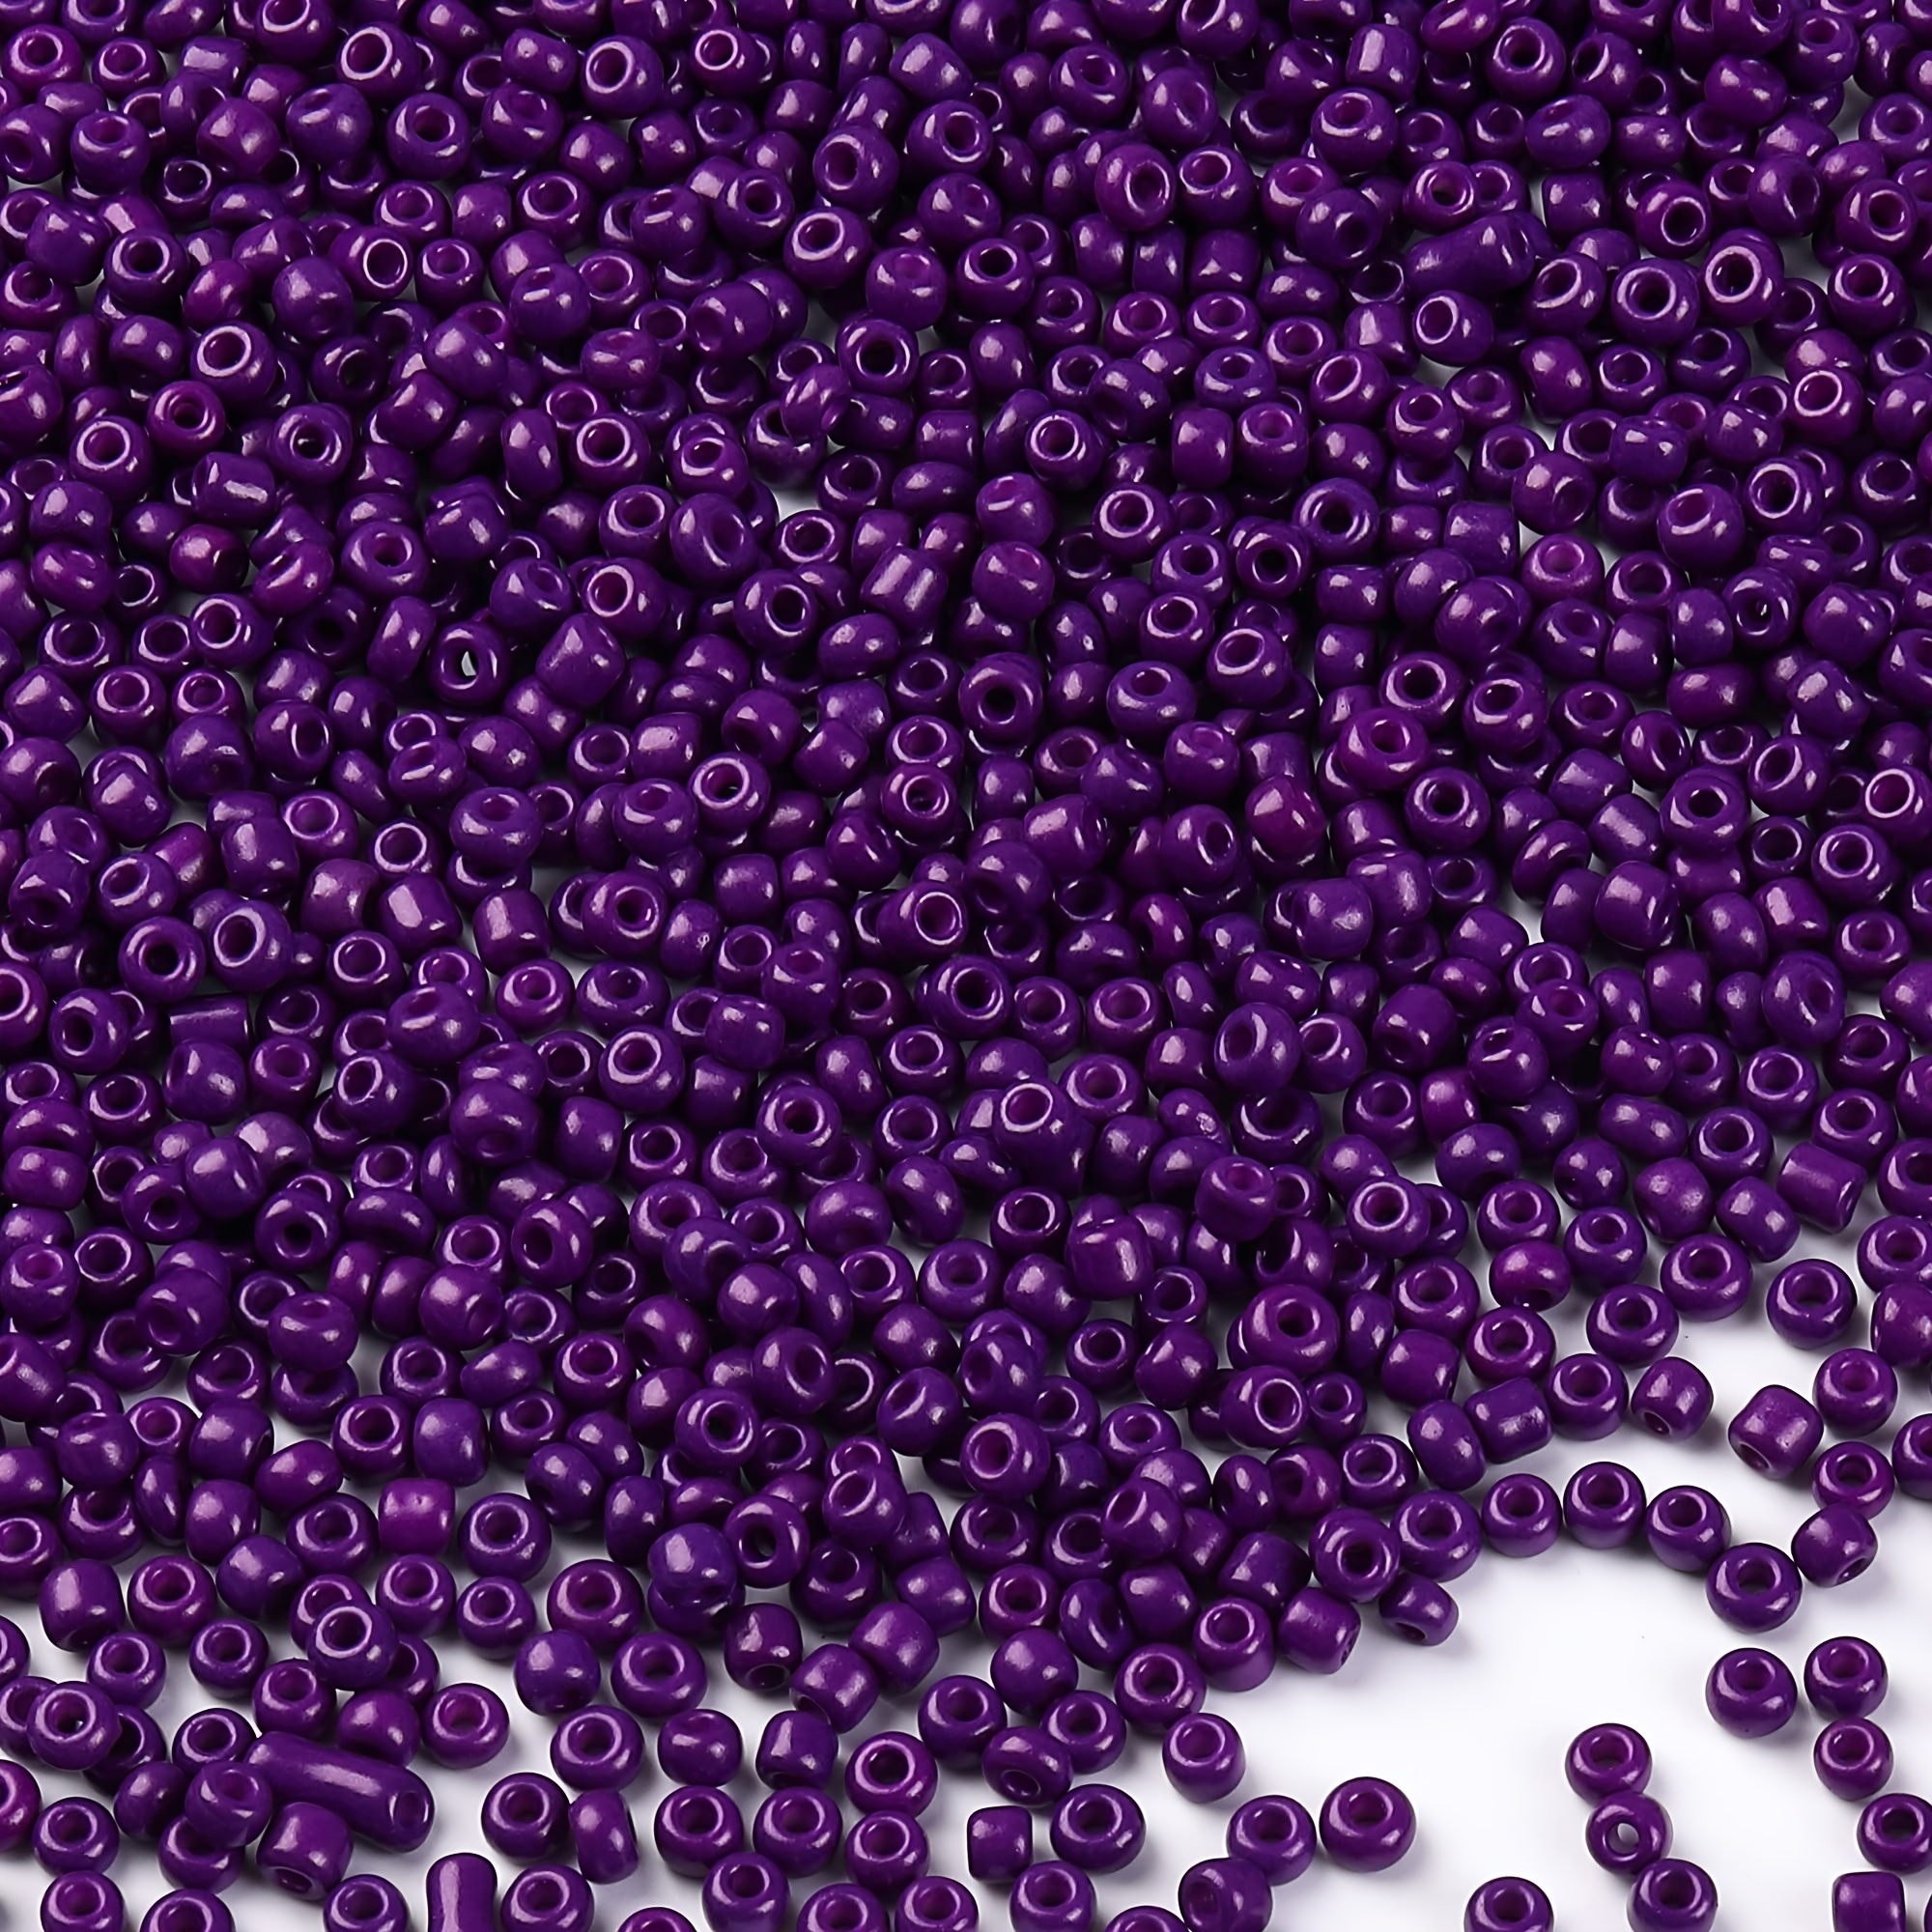 Seed Beads for Jewelry Making, 6/0 4mm Pack Multicolor Beads for  Bracelets,Beading,Crafting (4mm) (3mm)